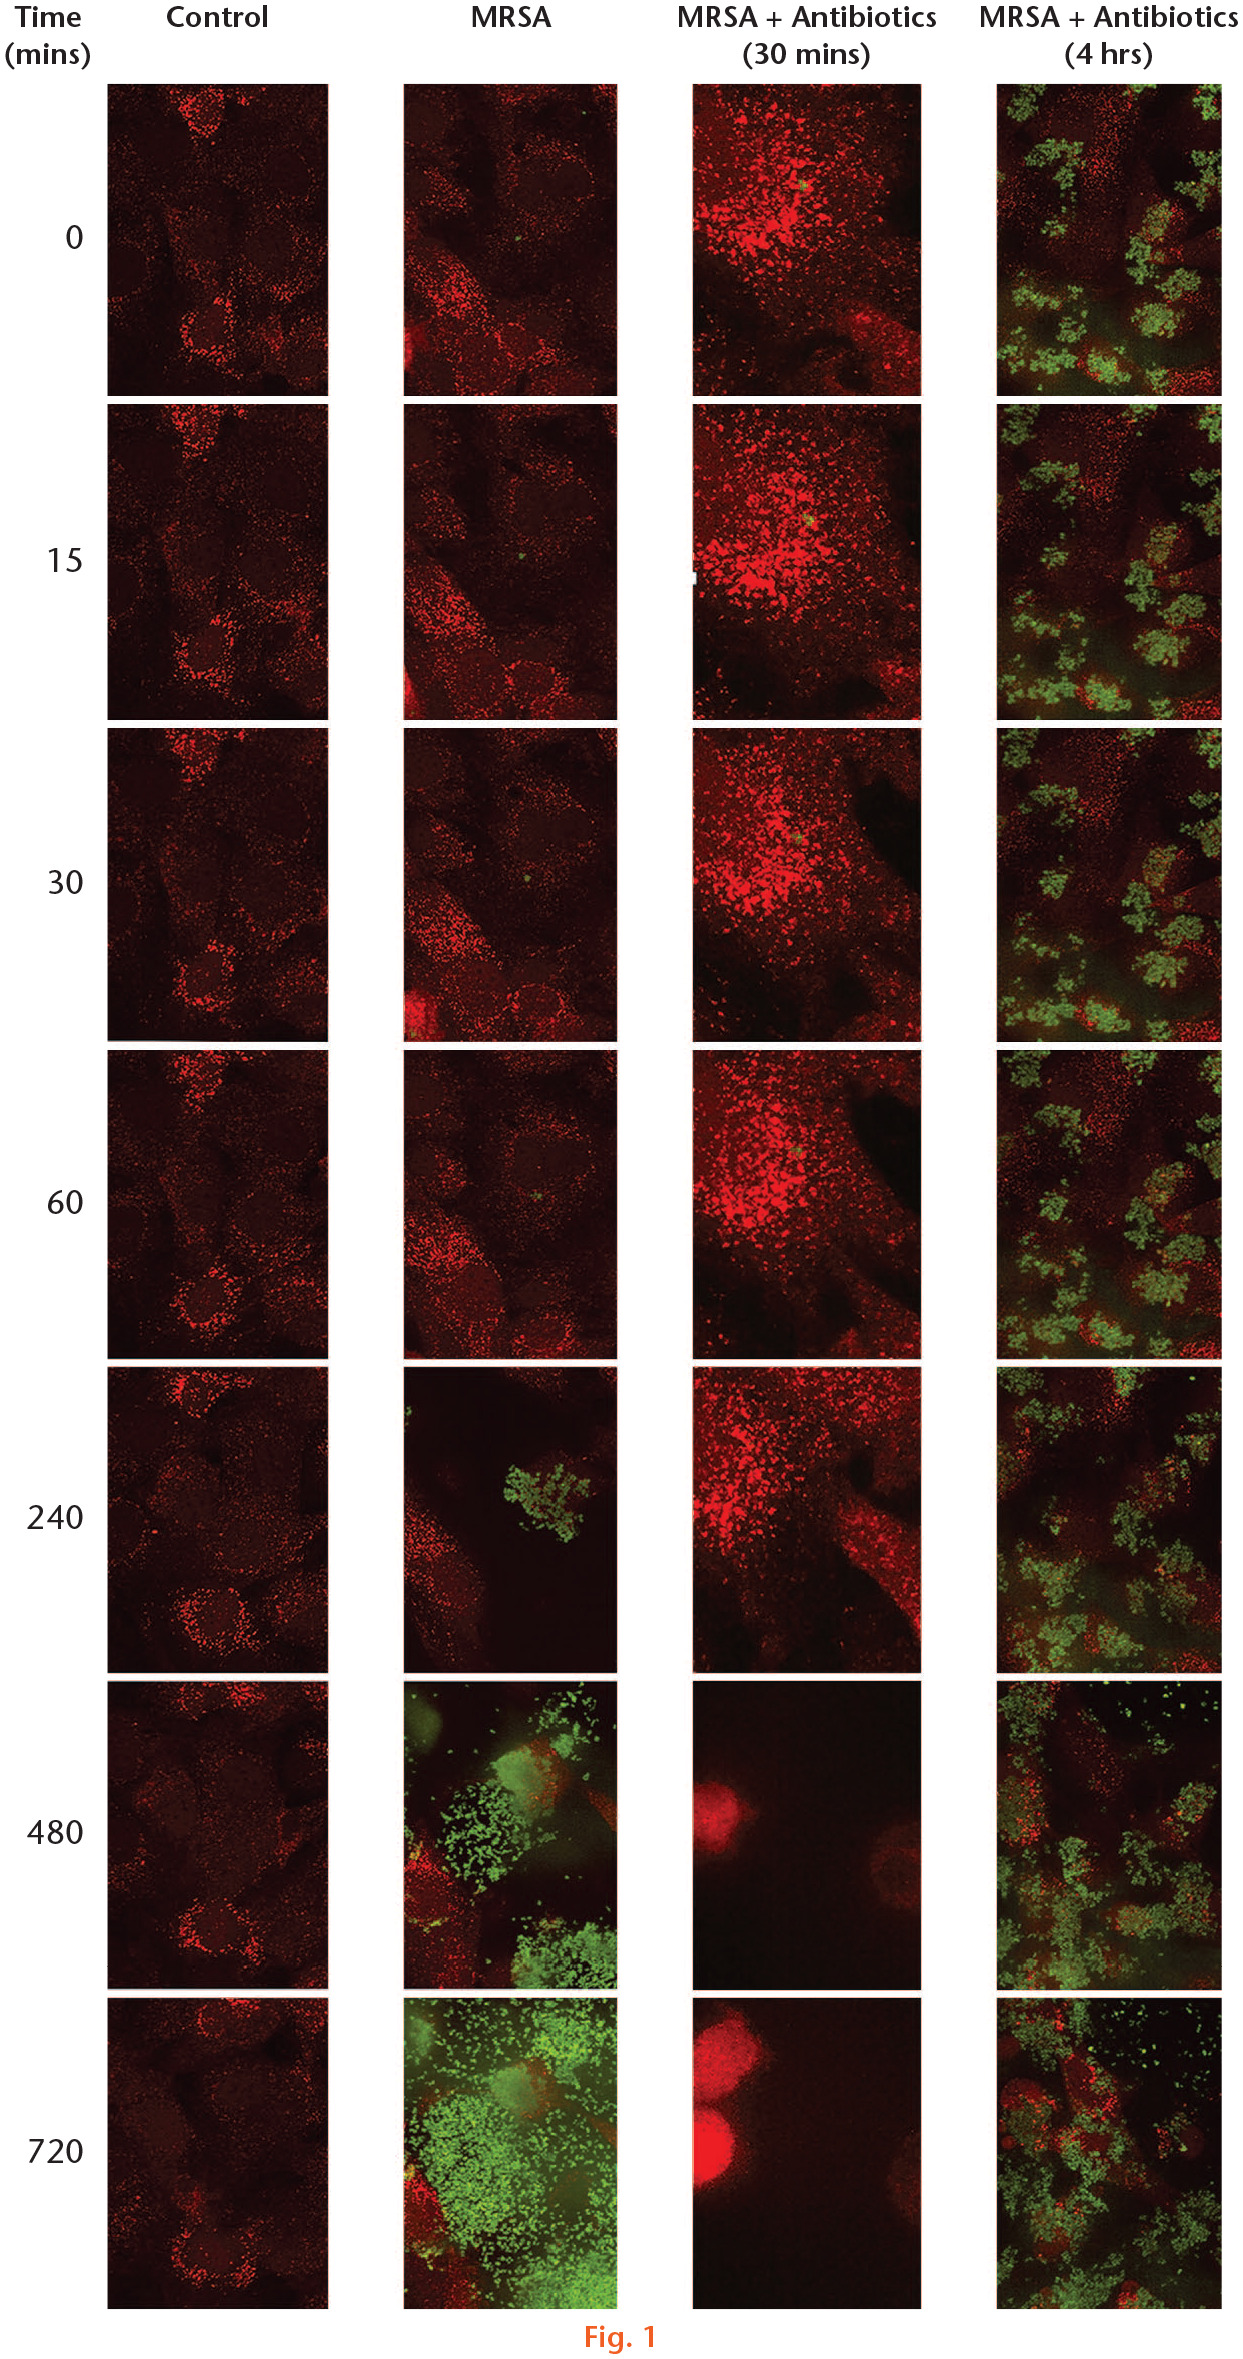 Fig. 1 
            Time-lapse microscopy images of mCherry-labelled osteoblasts (OBs) exposed to green fluorescent protein (GFP)-labelled USA300 over 14 hours. Rapid bacterial proliferation was observed in USA300-infected OBs between the first and second hours of infection. Administration of 50 μg/ml gentamicin occurred either 30 minutes or four hours postinfection. Gentamicin treatment within the first 30 minutes of infection significantly reduced bacterial burden relative to the untreated and four-hour postinfection treatment groups by one-way, repeated measures ANOVA (p = 0.025). Bacterial burden was reduced in USA300-infected OBs treated with gentamicin four hours postinfection, but to a lesser extent than that in the OBs treated within 30 minutes of infection. ANOVA, analysis of variance. MRSA, methicillin-resistant Staphylococcus aureus.
          